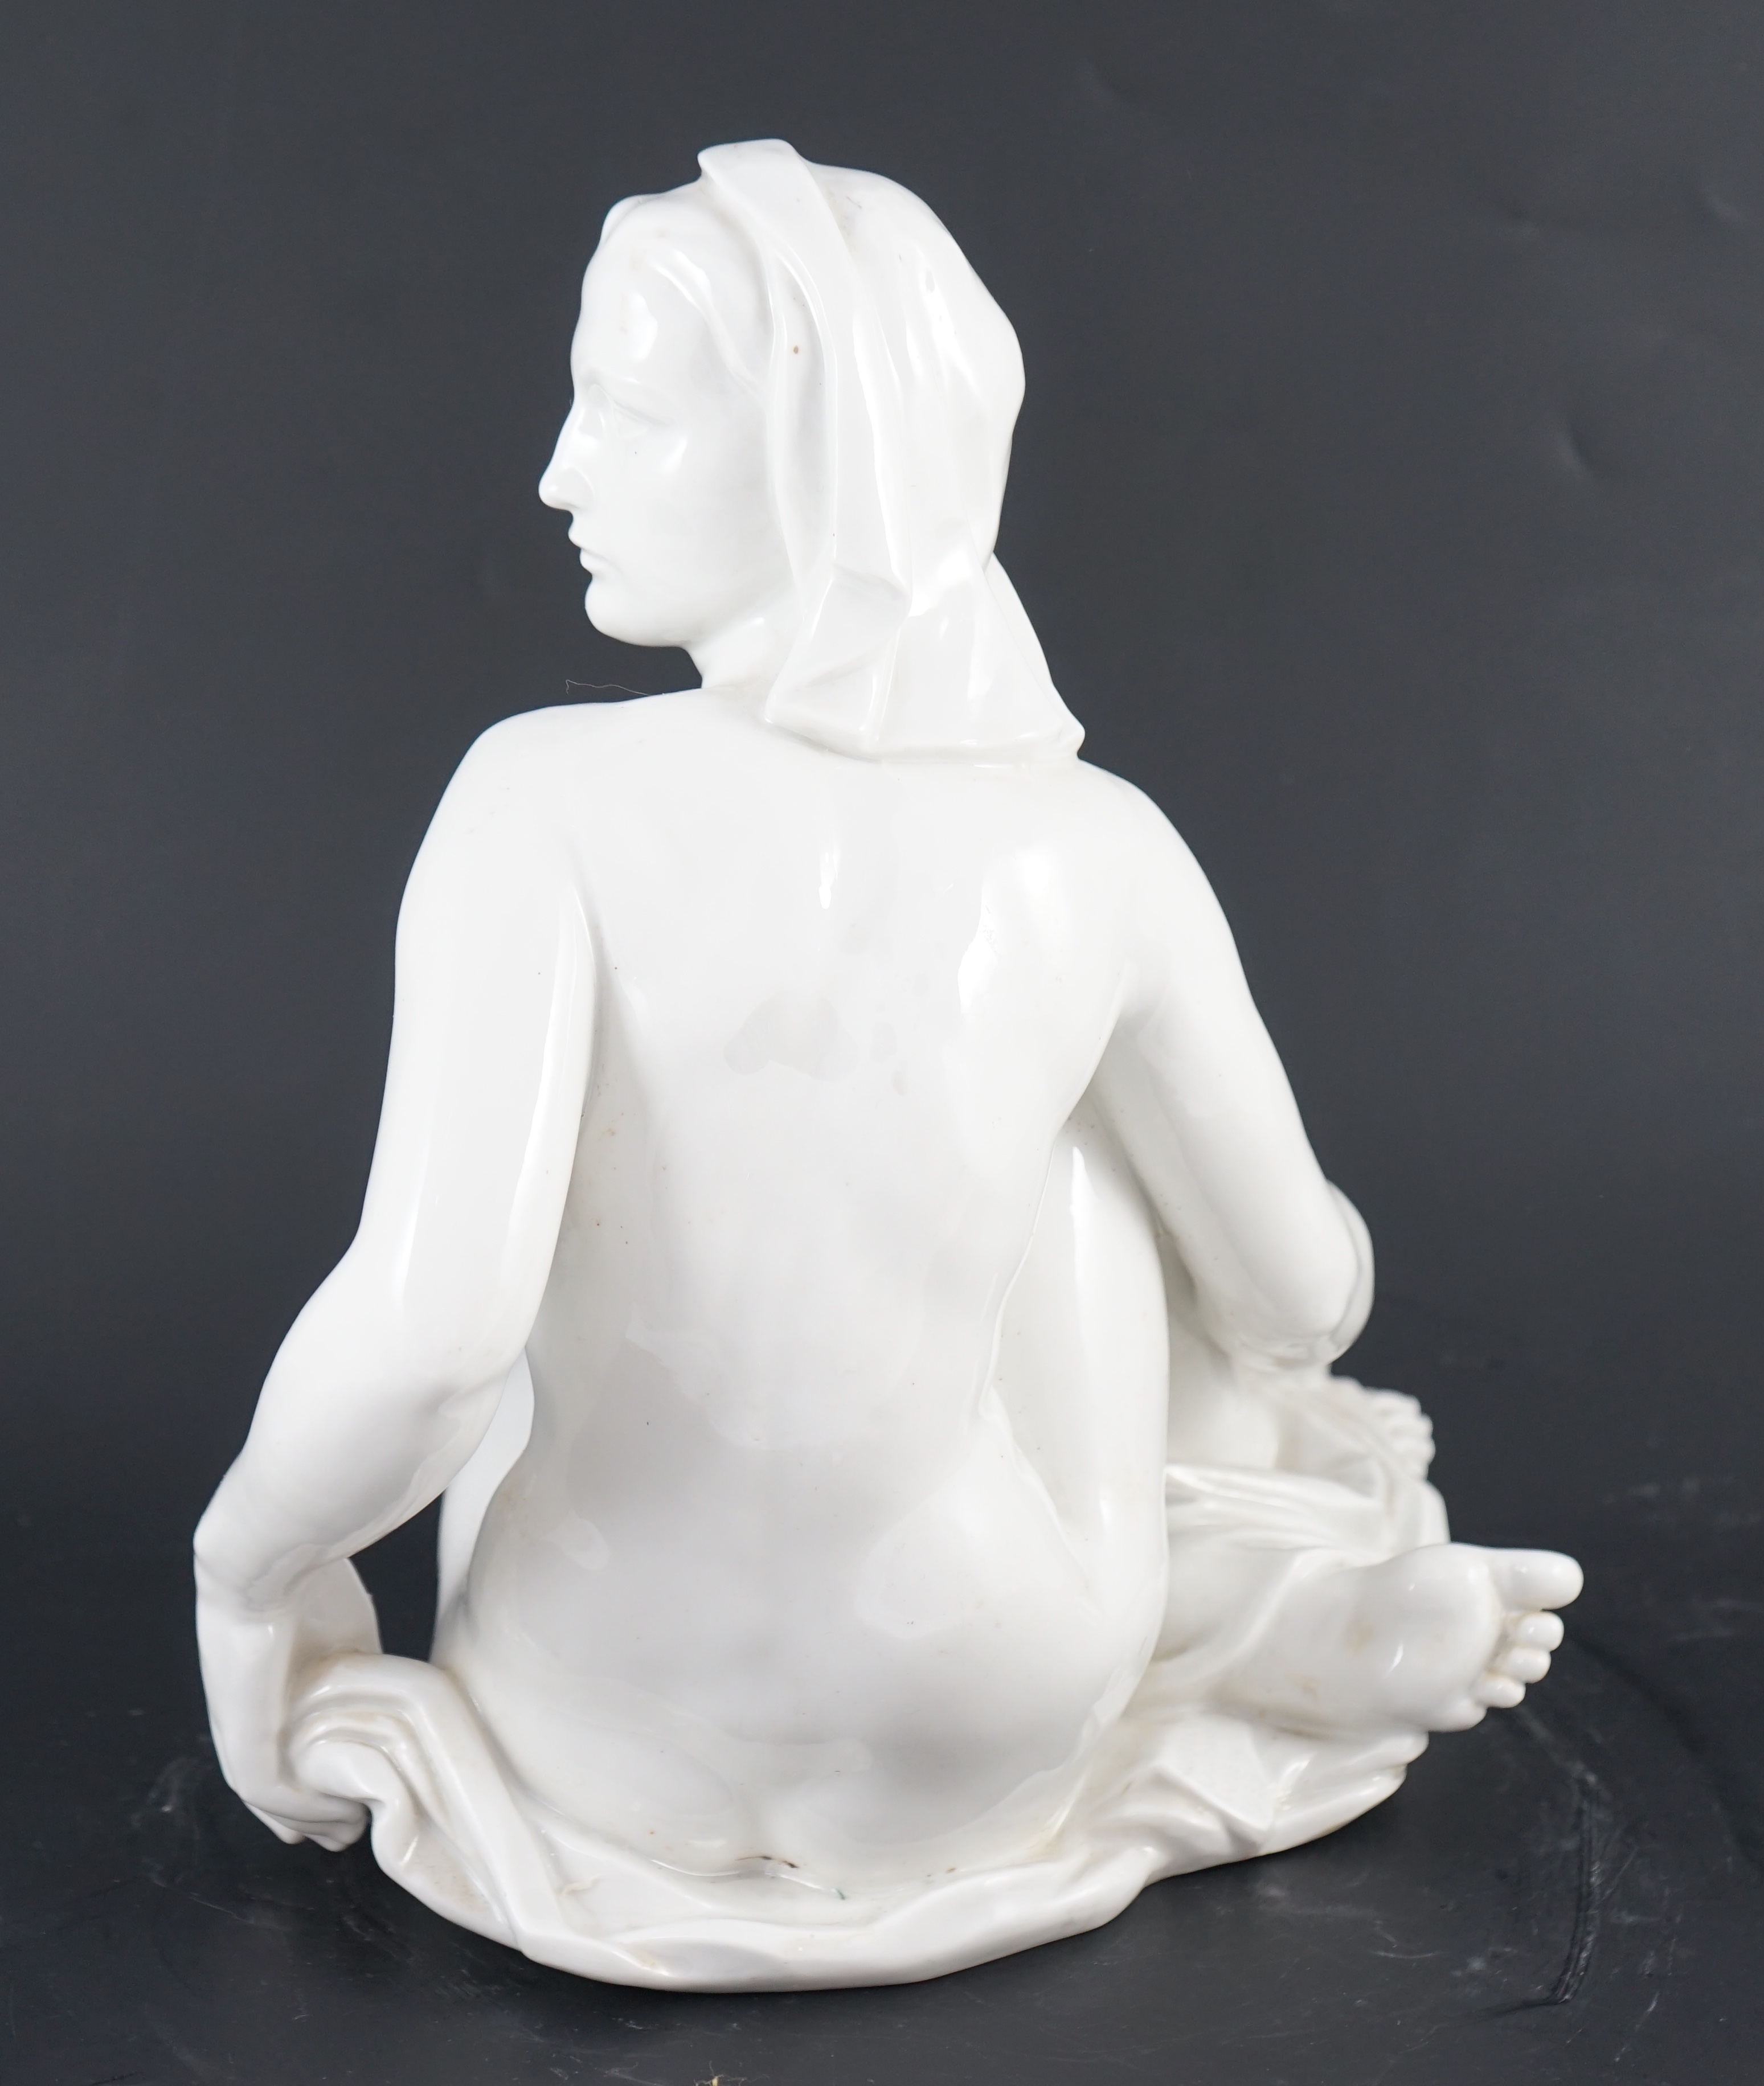 Robert Ullmann (1903-1966) for Meissen, a white glazed porcelain figure of a seated female nude, - Image 3 of 8